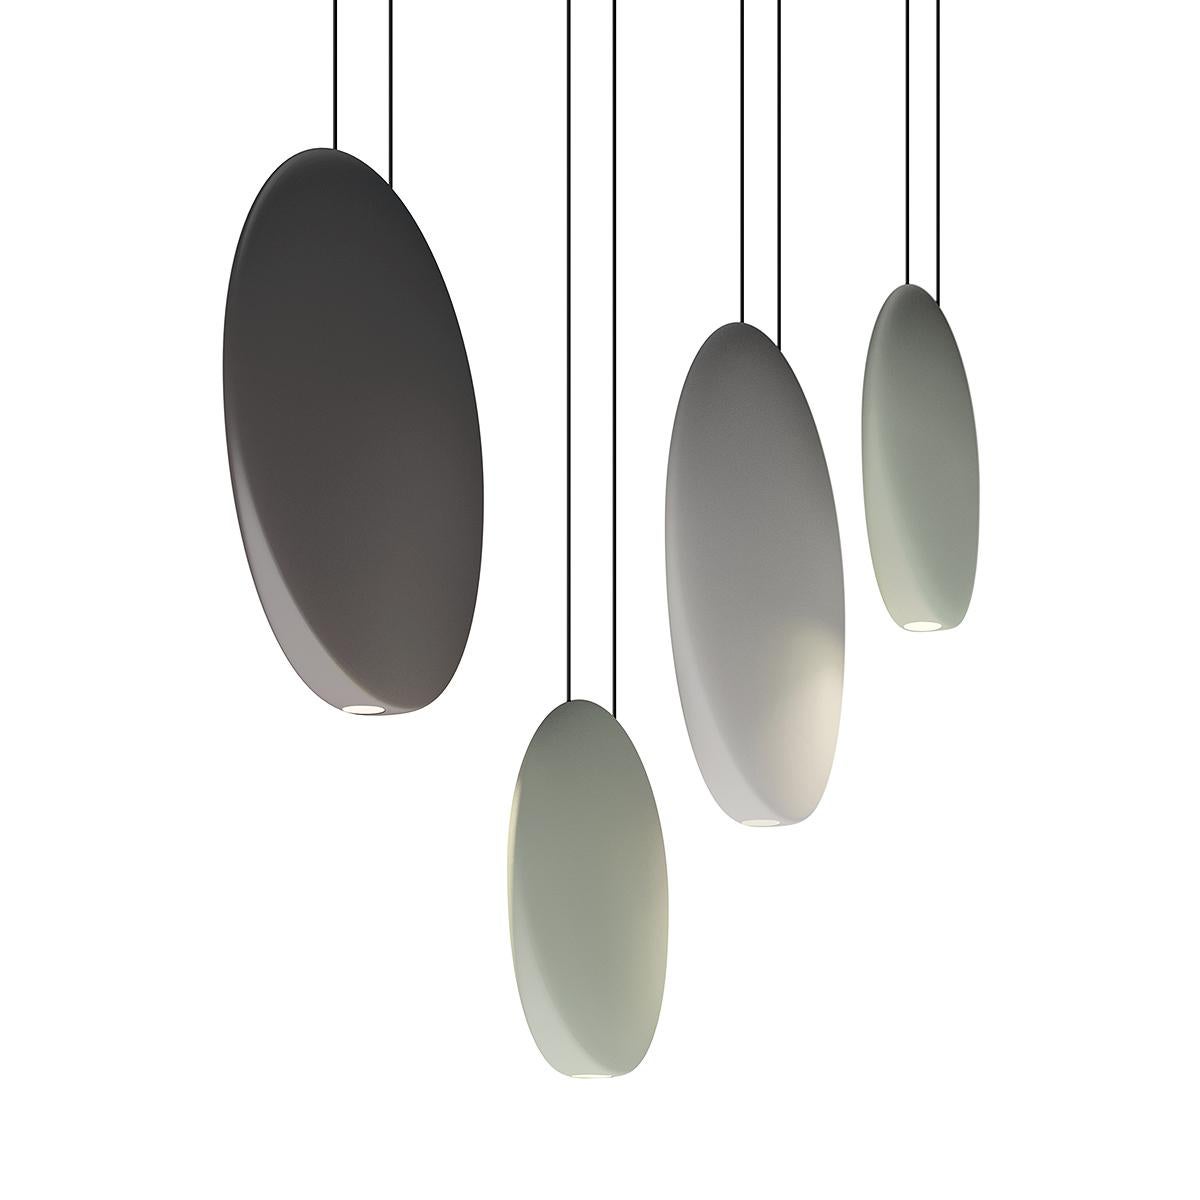 Cosmos is a sculptural hanging lamp. Designed by Lievore, Altherr, Molina. Available in various colors: chocolate, green and light grey.

Installation type: Surface mounted

Shade: Polycarbonate diffuser

Materials: 
Canopy Plate: